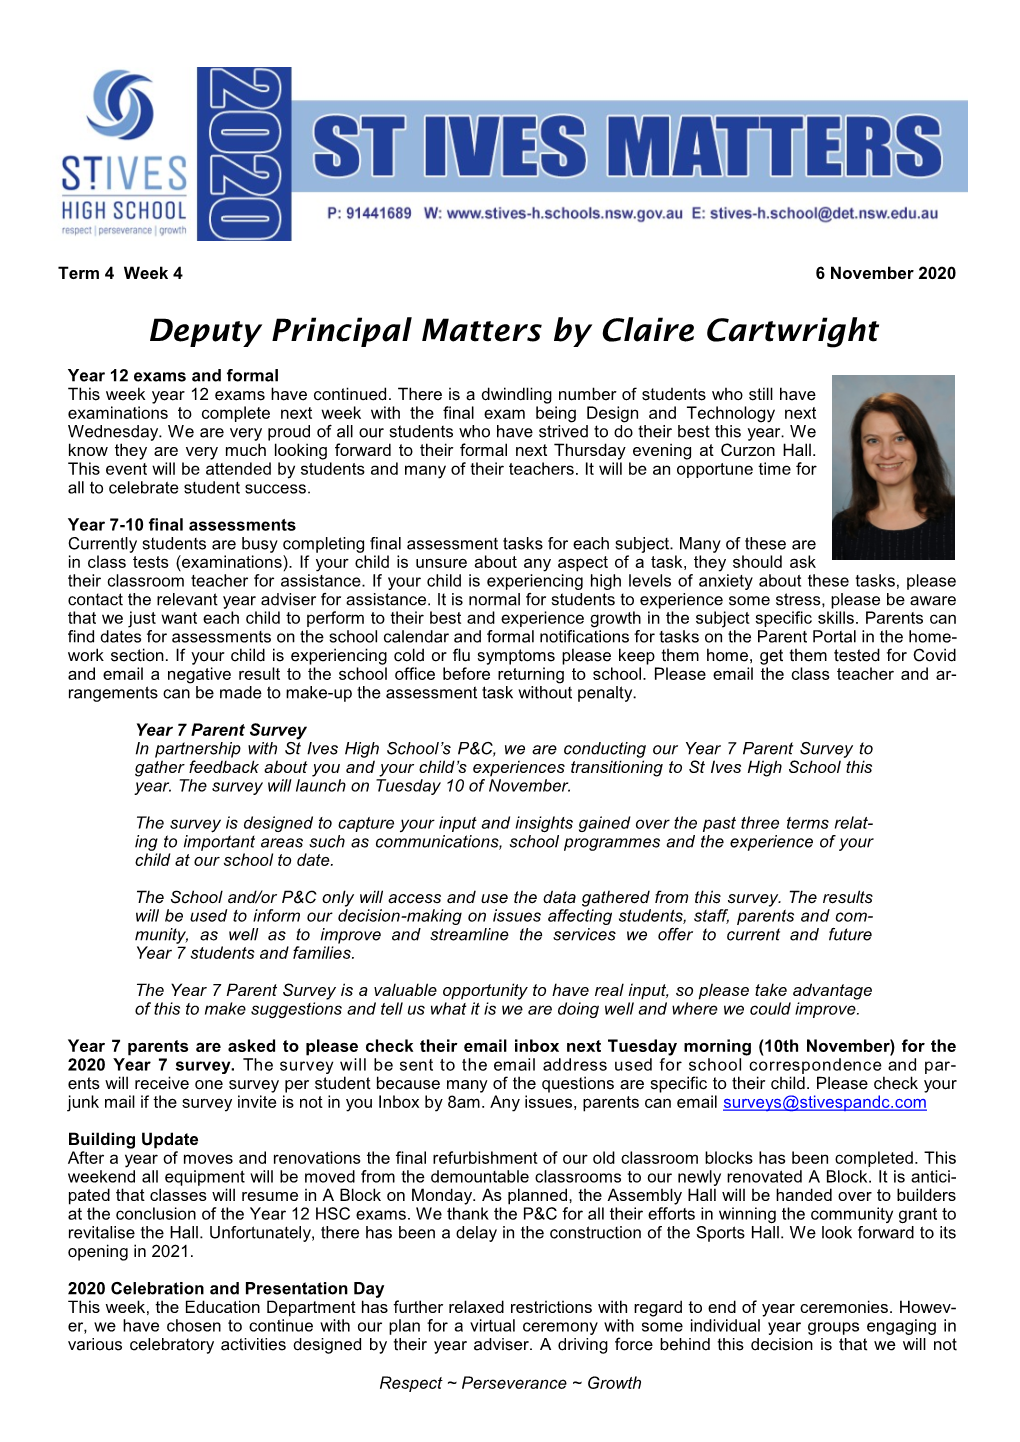 Deputy Principal Matters by Claire Cartwright